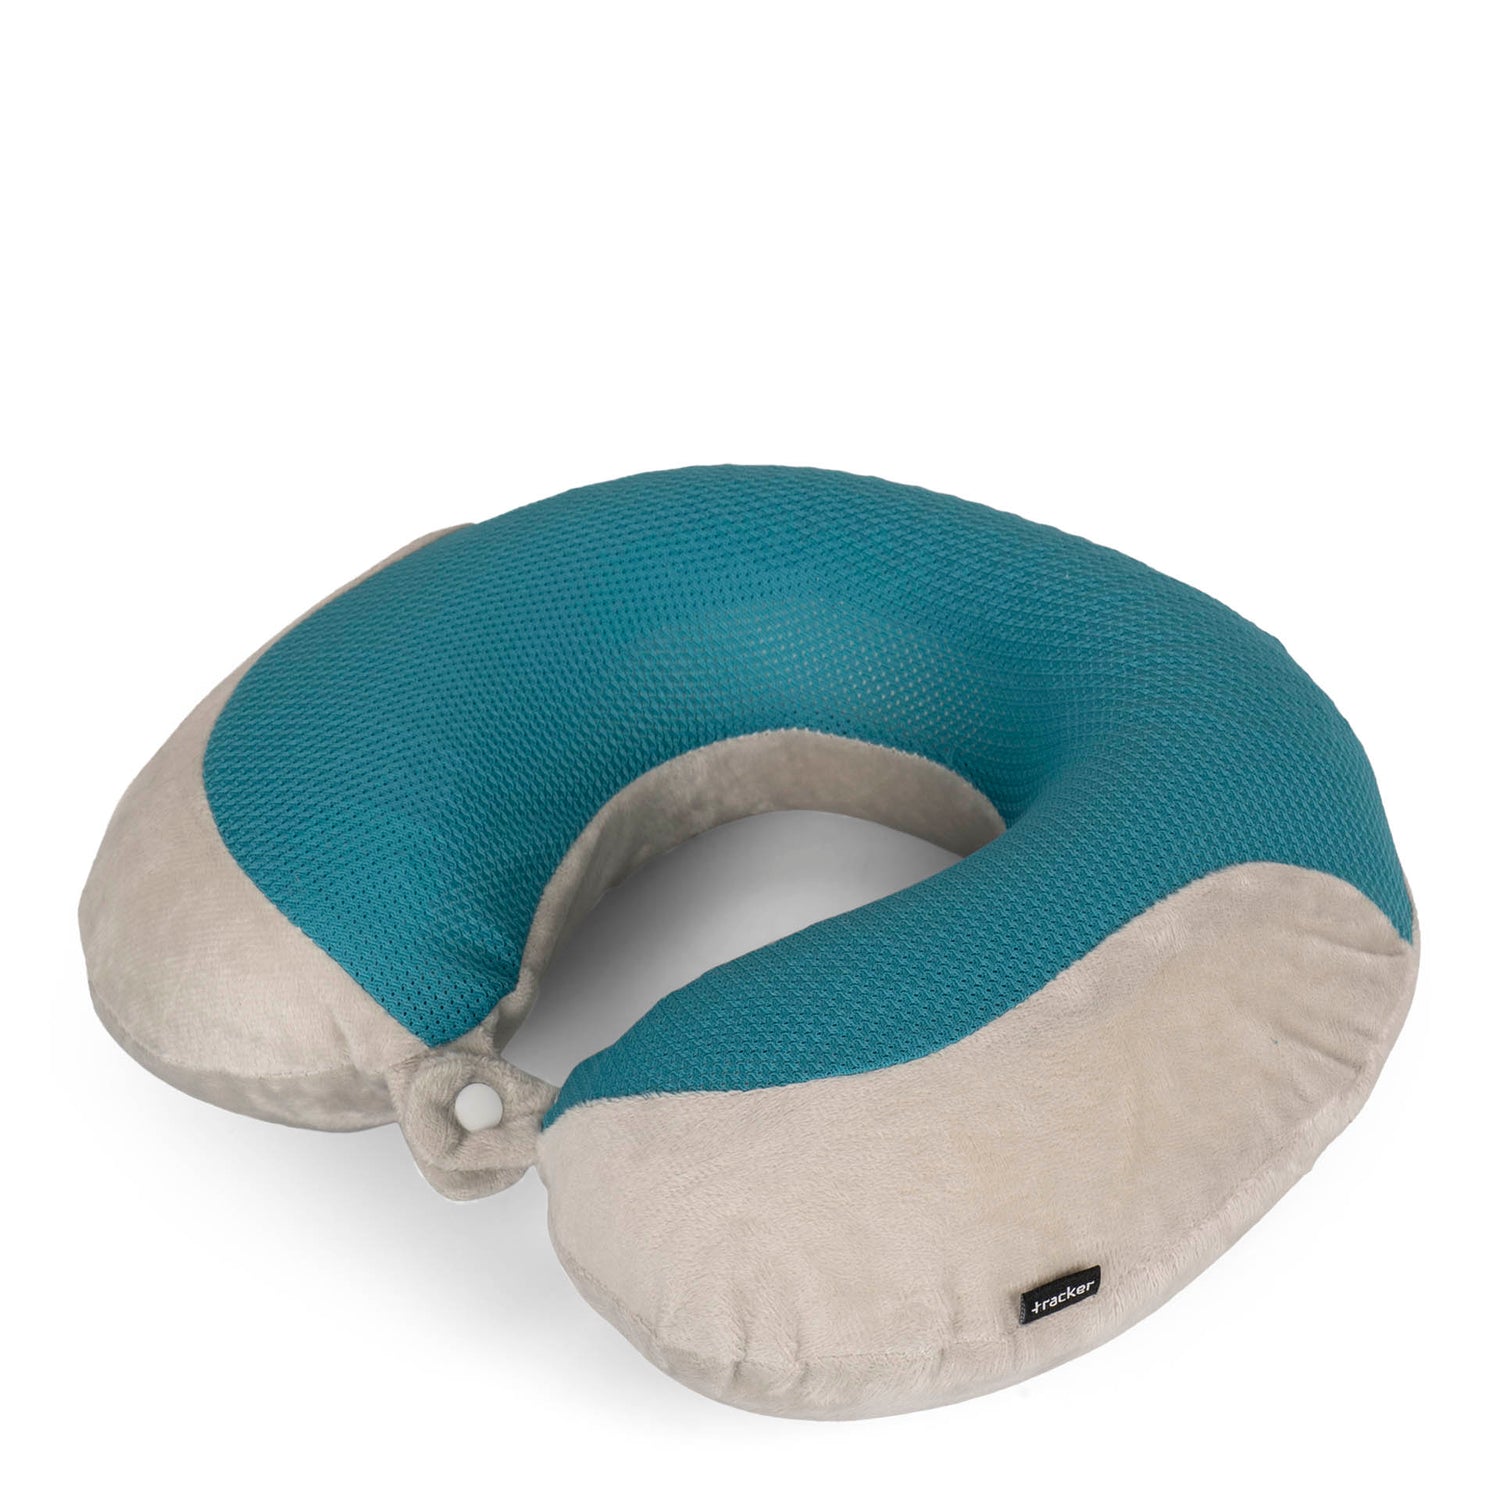 Frontside view of a memory foam travel pillow that is blue and white and designed by tracker. It has a snapbutton closure for a sung fit and looks super soft.